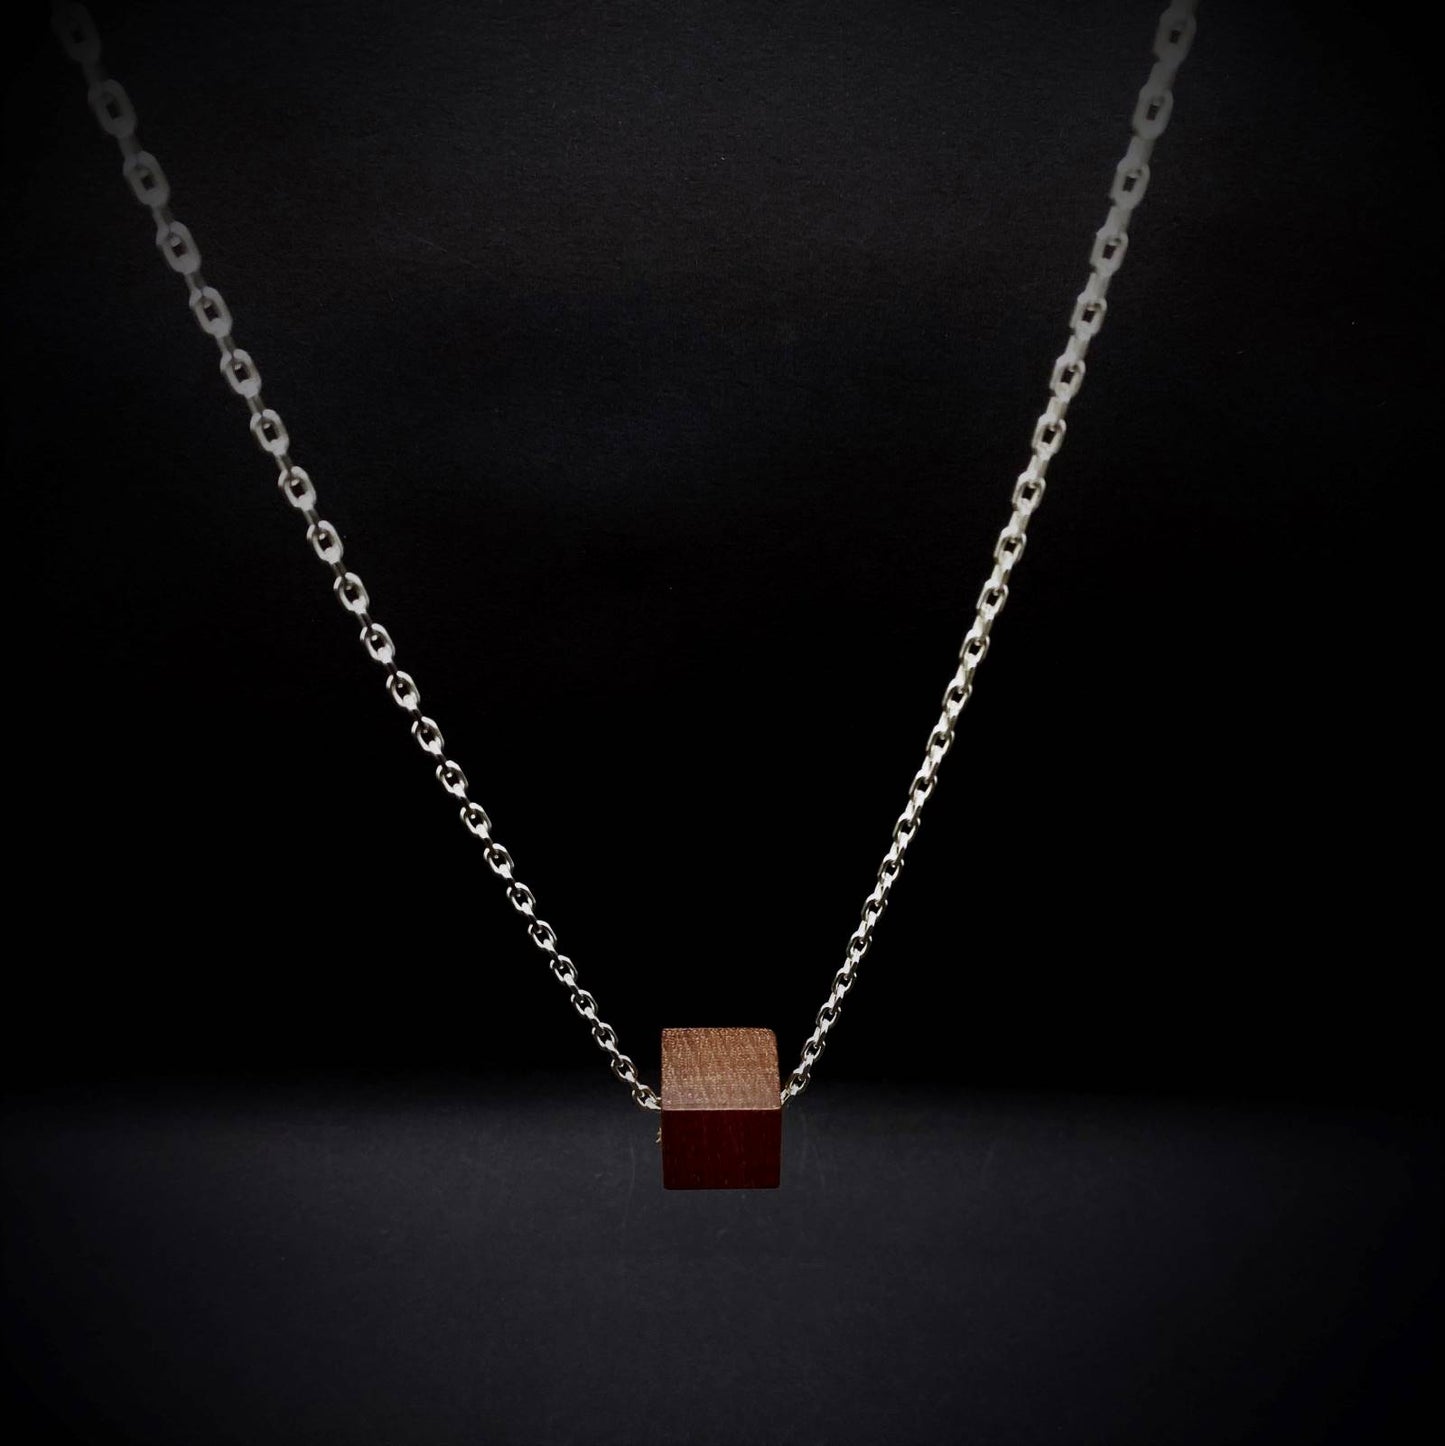 stylish mens jewellery piece Brier Cube Pendant Mens Necklace with wood block and silver detail and long chain by Silverwood Jewellery made in england